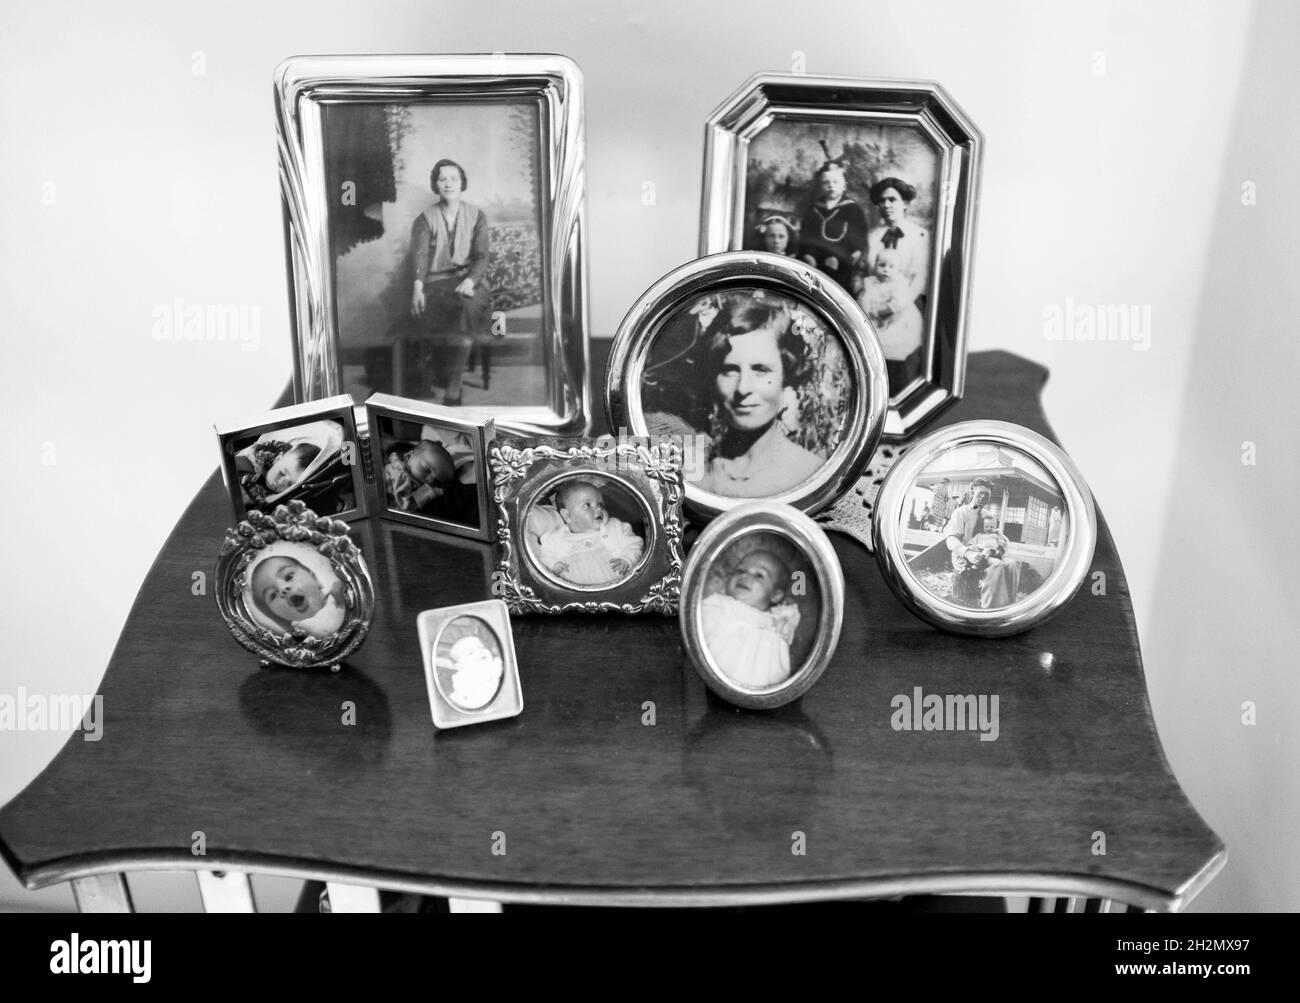 Family memories photographs on display at home Stock Photo